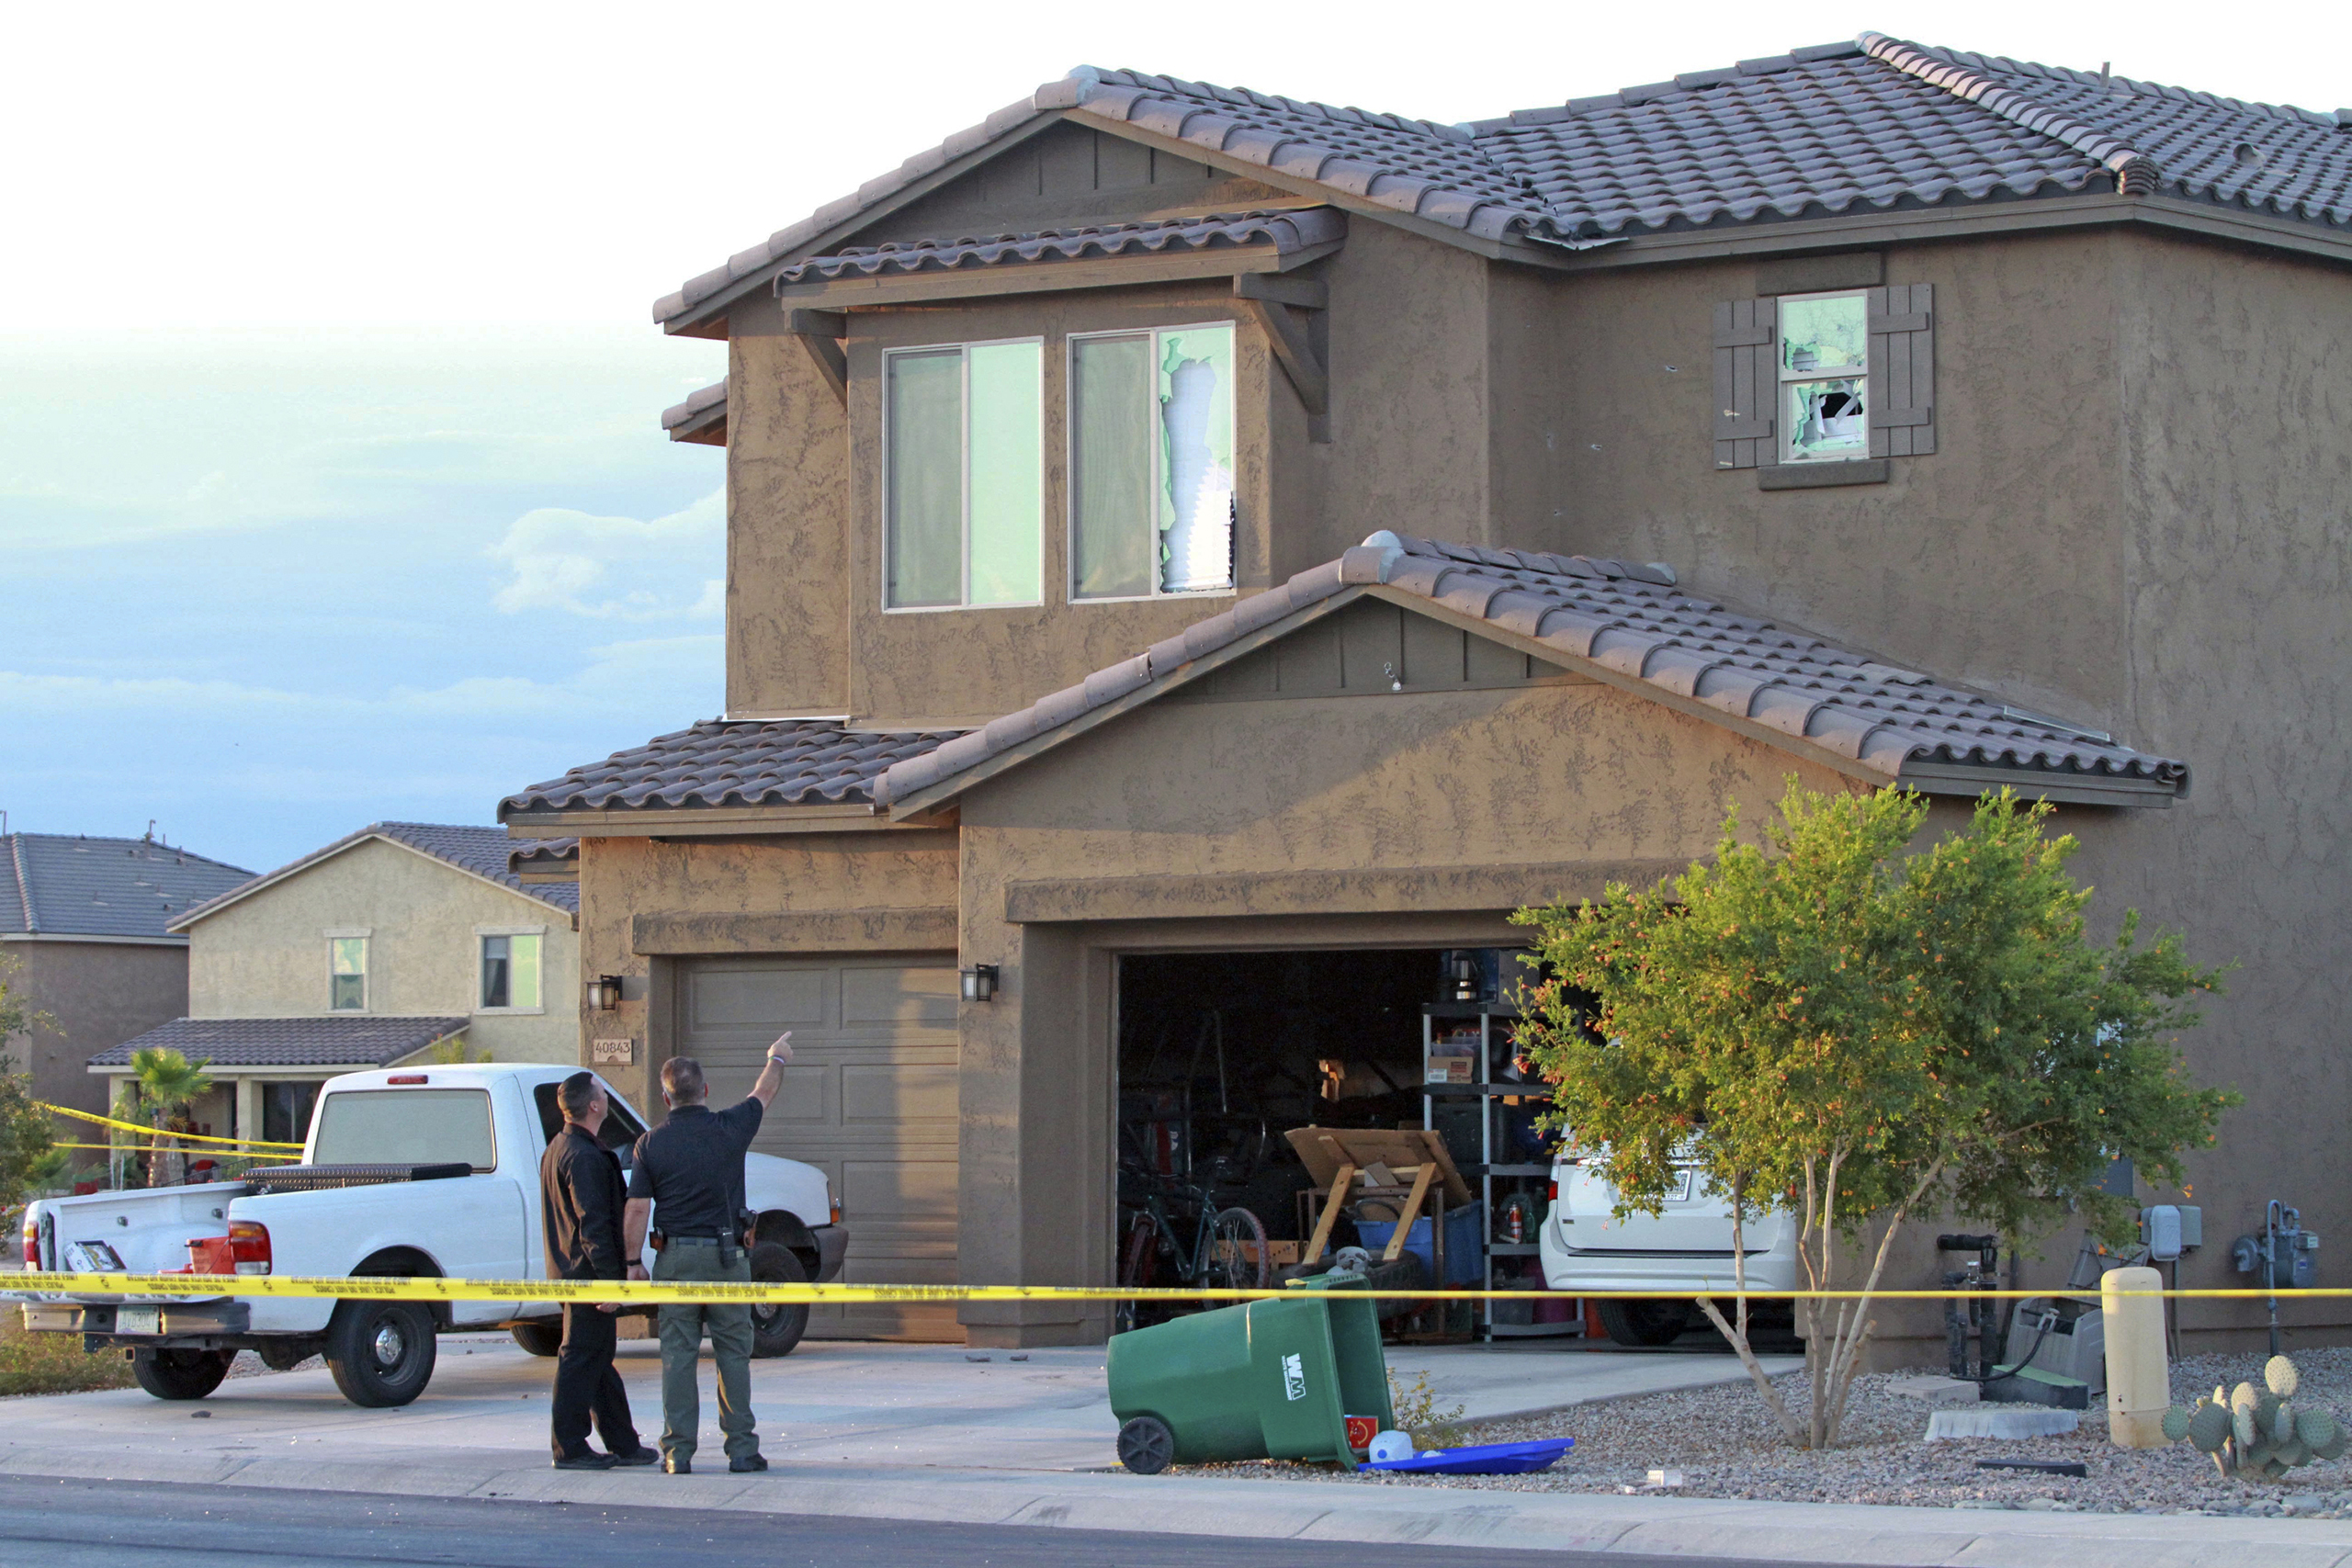 Police point to the window of a Maricopa home where a Border Patrol agent was found dead inside after exchanging gunfire with officers responding to a domestic violence call, Sept. 27, 2016. (Howard Waggner—Maricopa Monitor/AP)